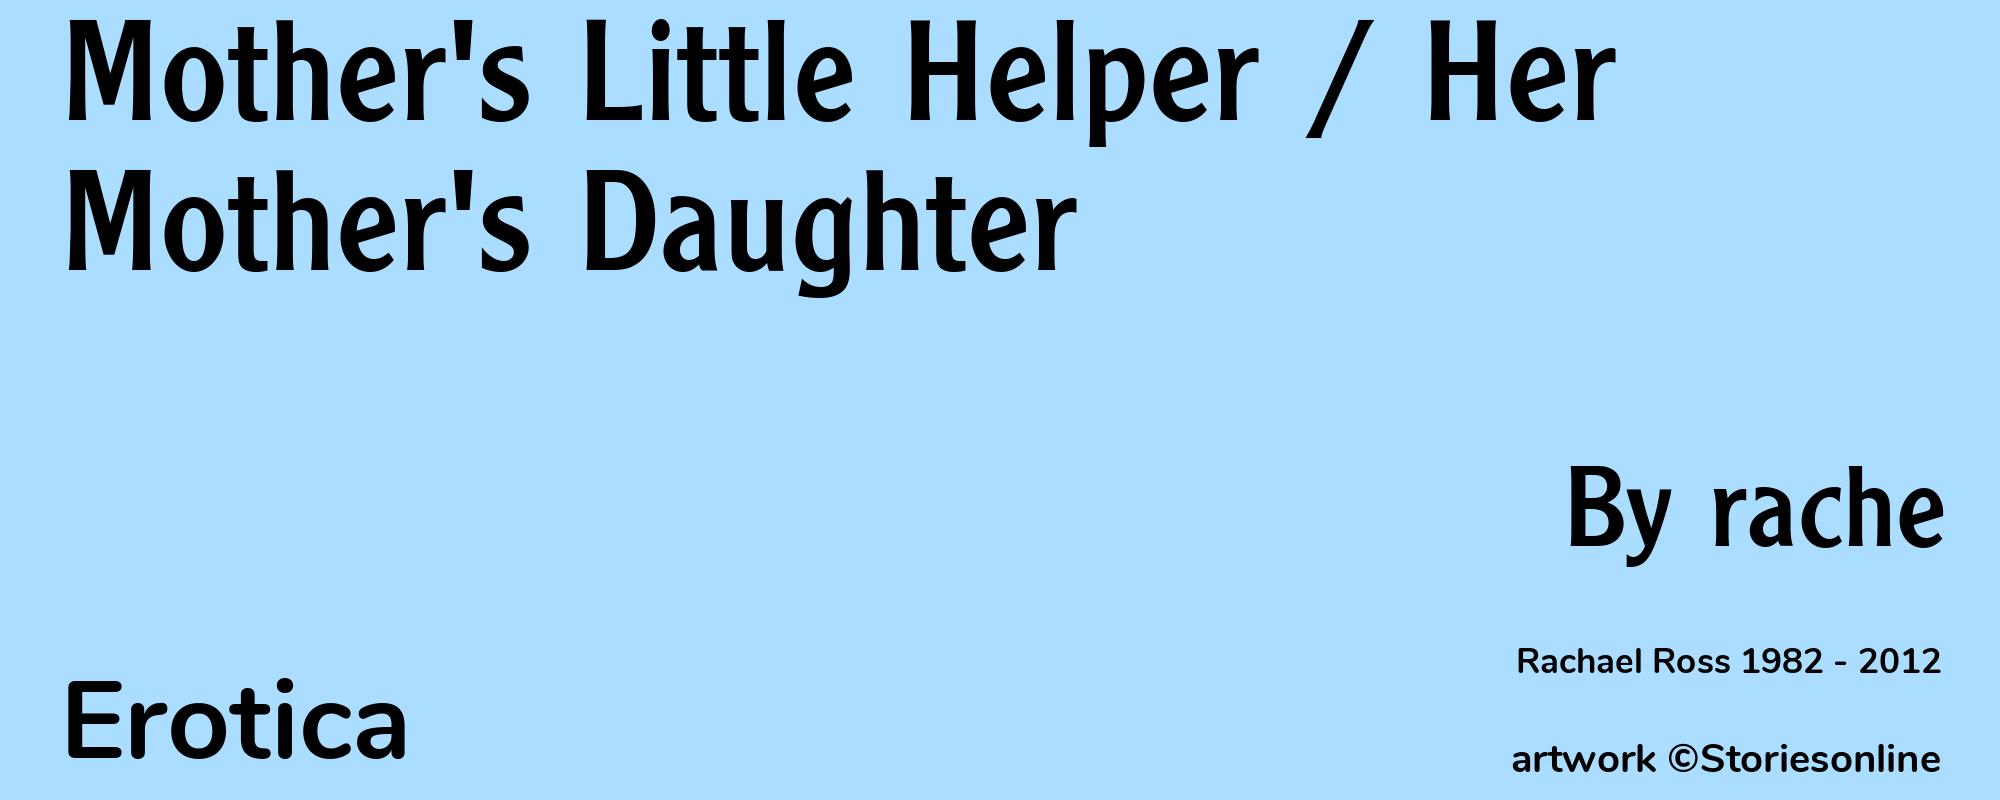 Mother's Little Helper / Her Mother's Daughter - Cover